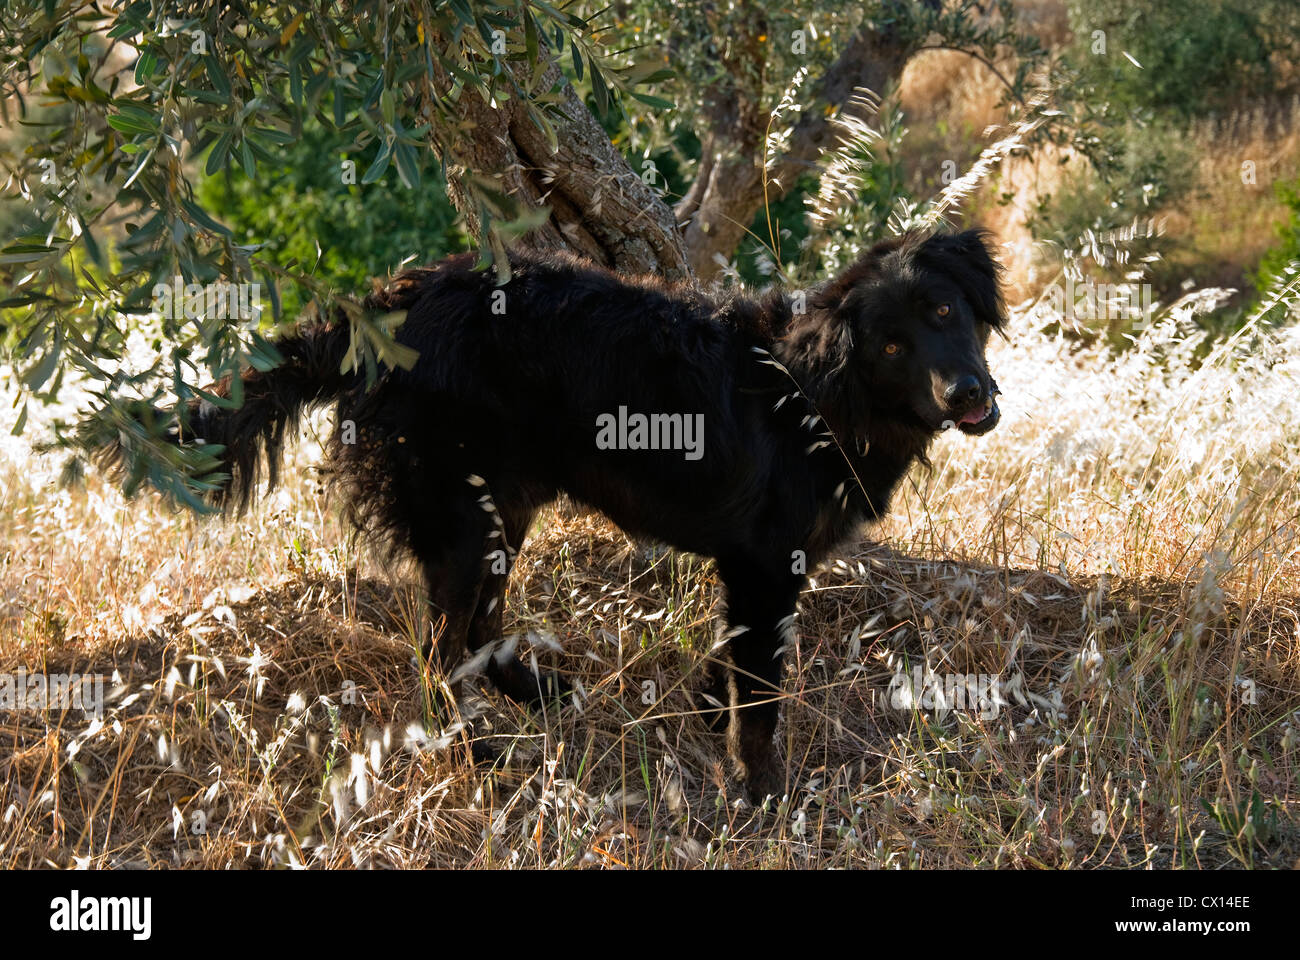 Black Greek sheep dog standing beneath an olive tree looking eagerly at camera Stock Photo